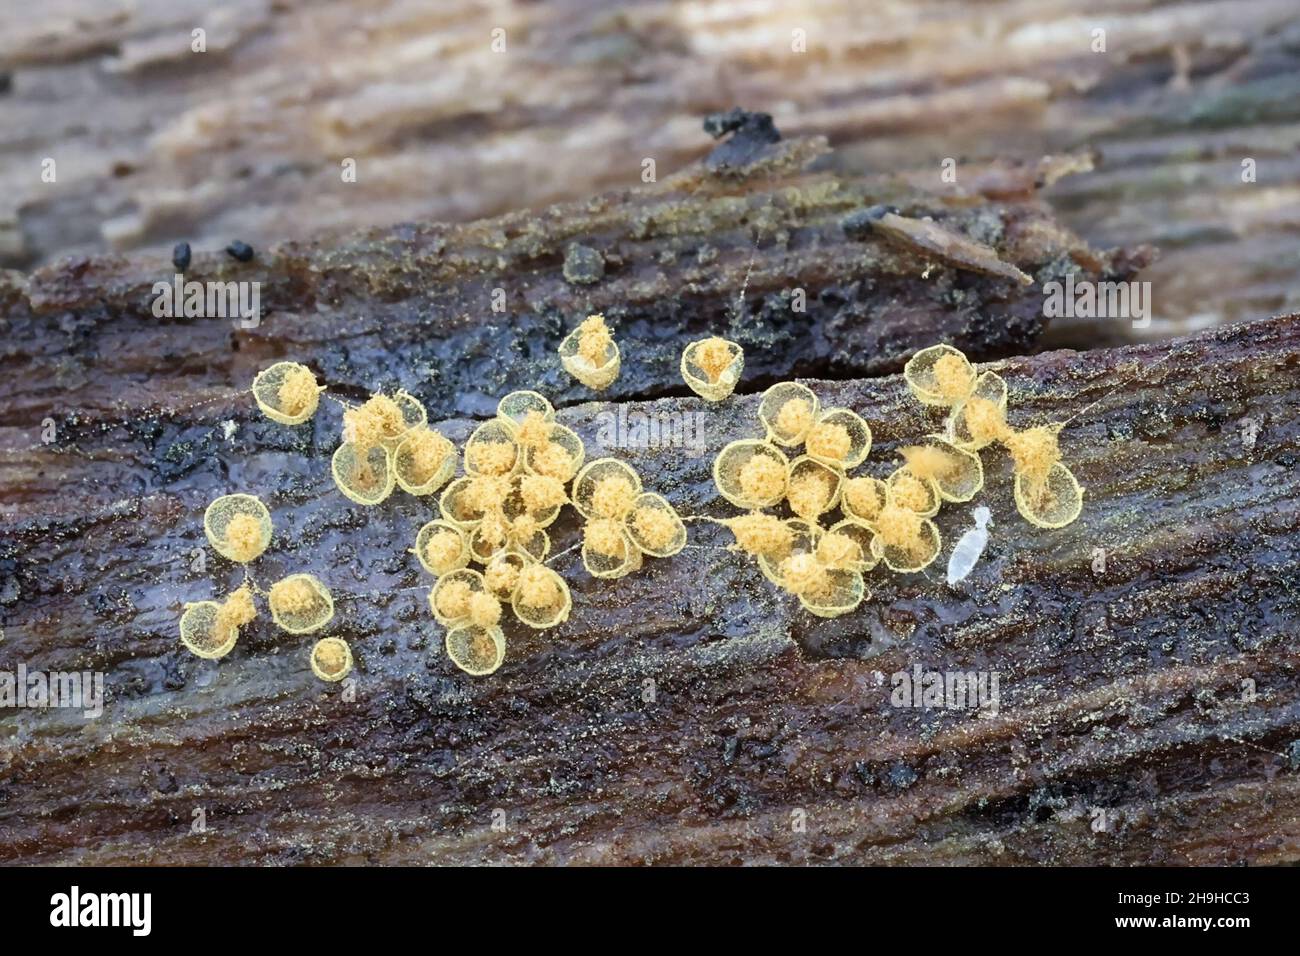 Hemitrichia abietina, also called Trichia abietina, a slime mold from Finland, no common English name Stock Photo